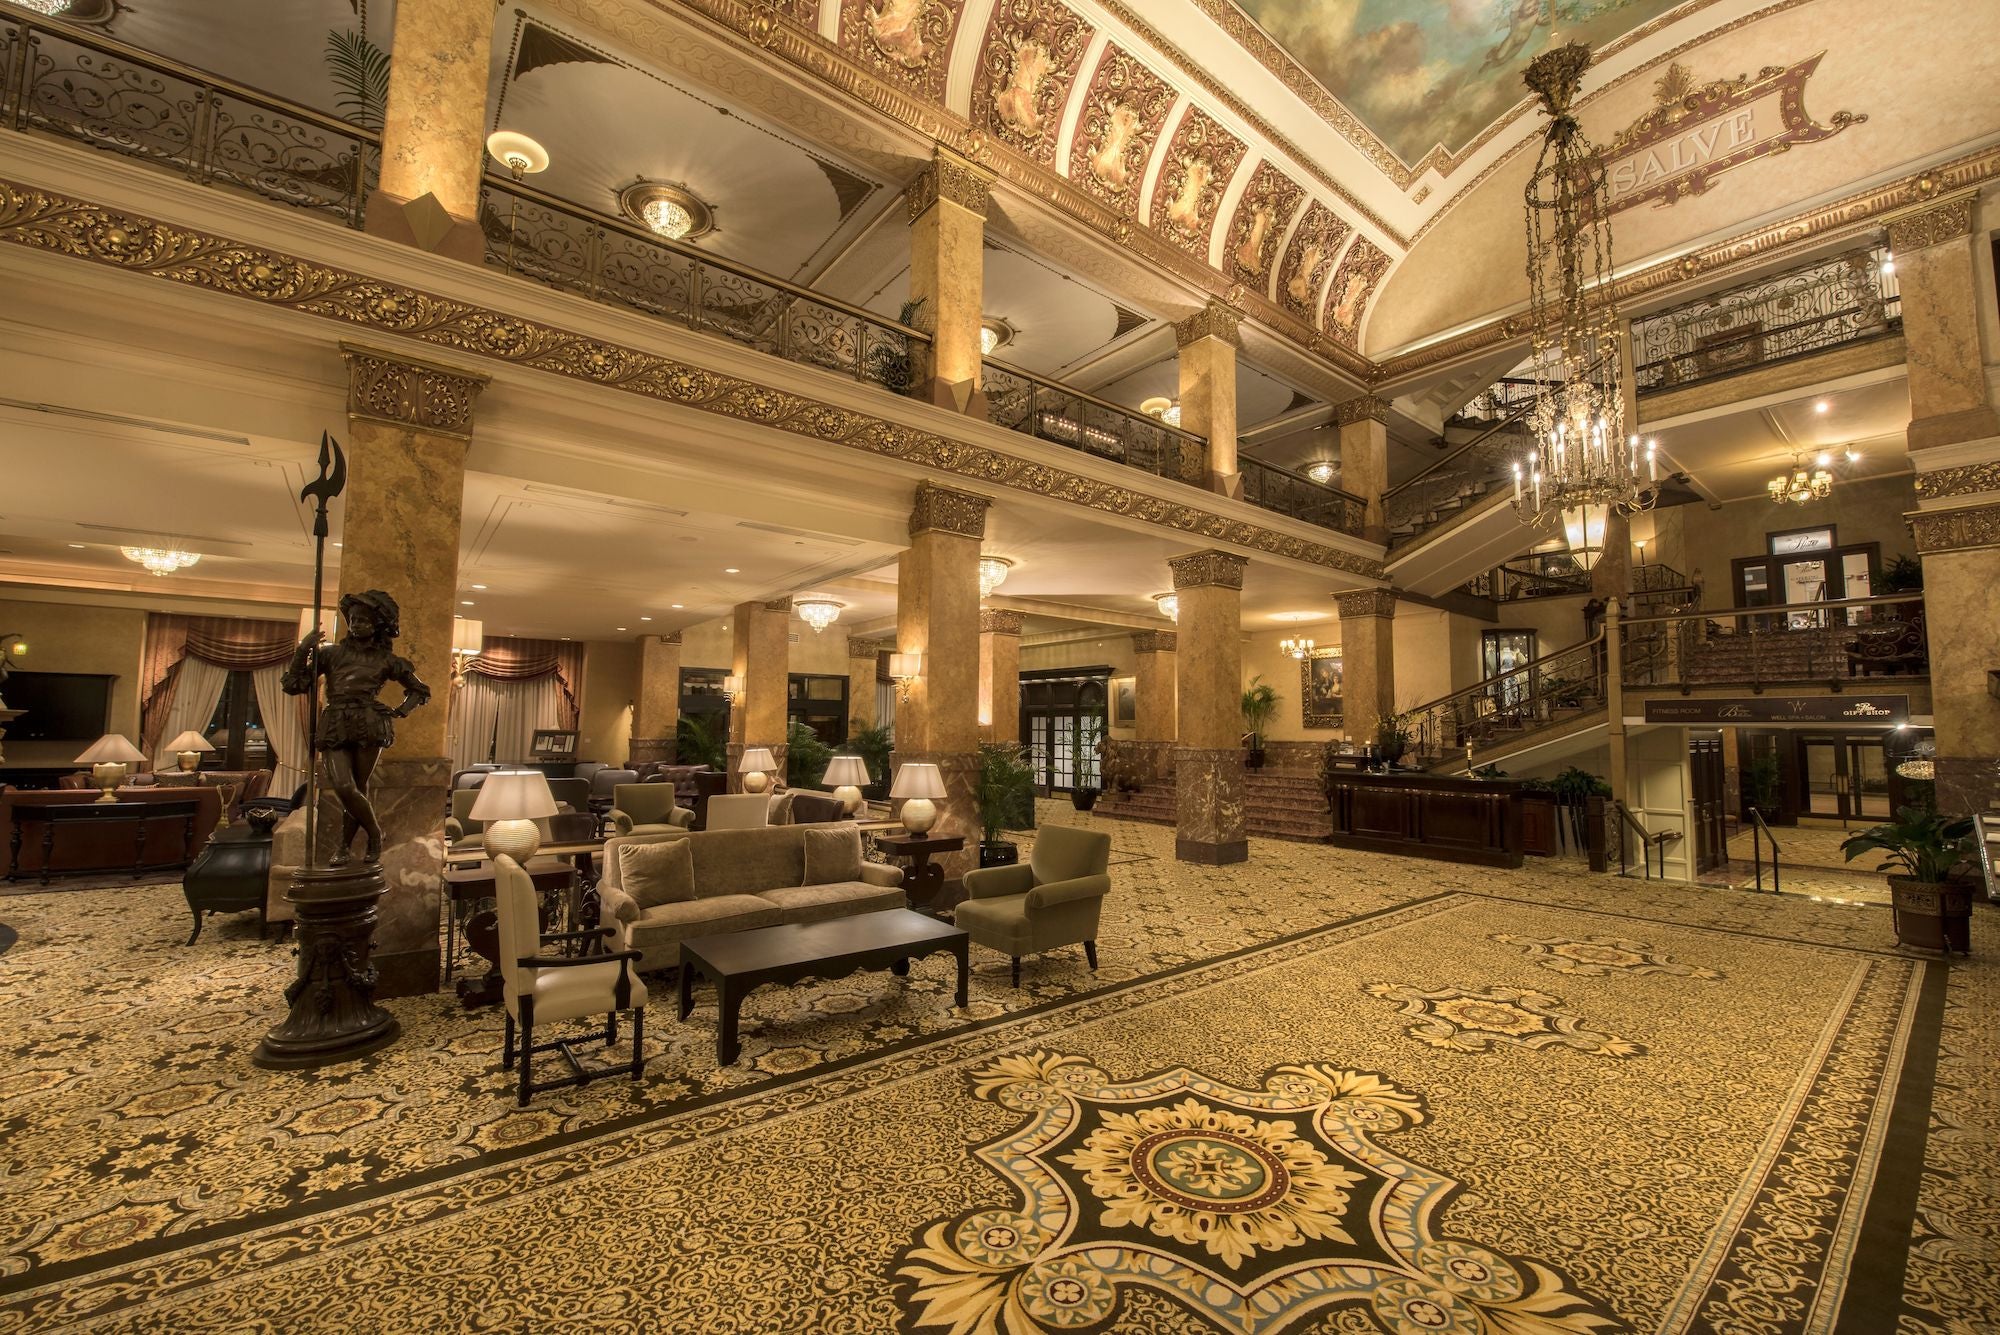 An ornately decorated lobby at the Pfister Hotel. 